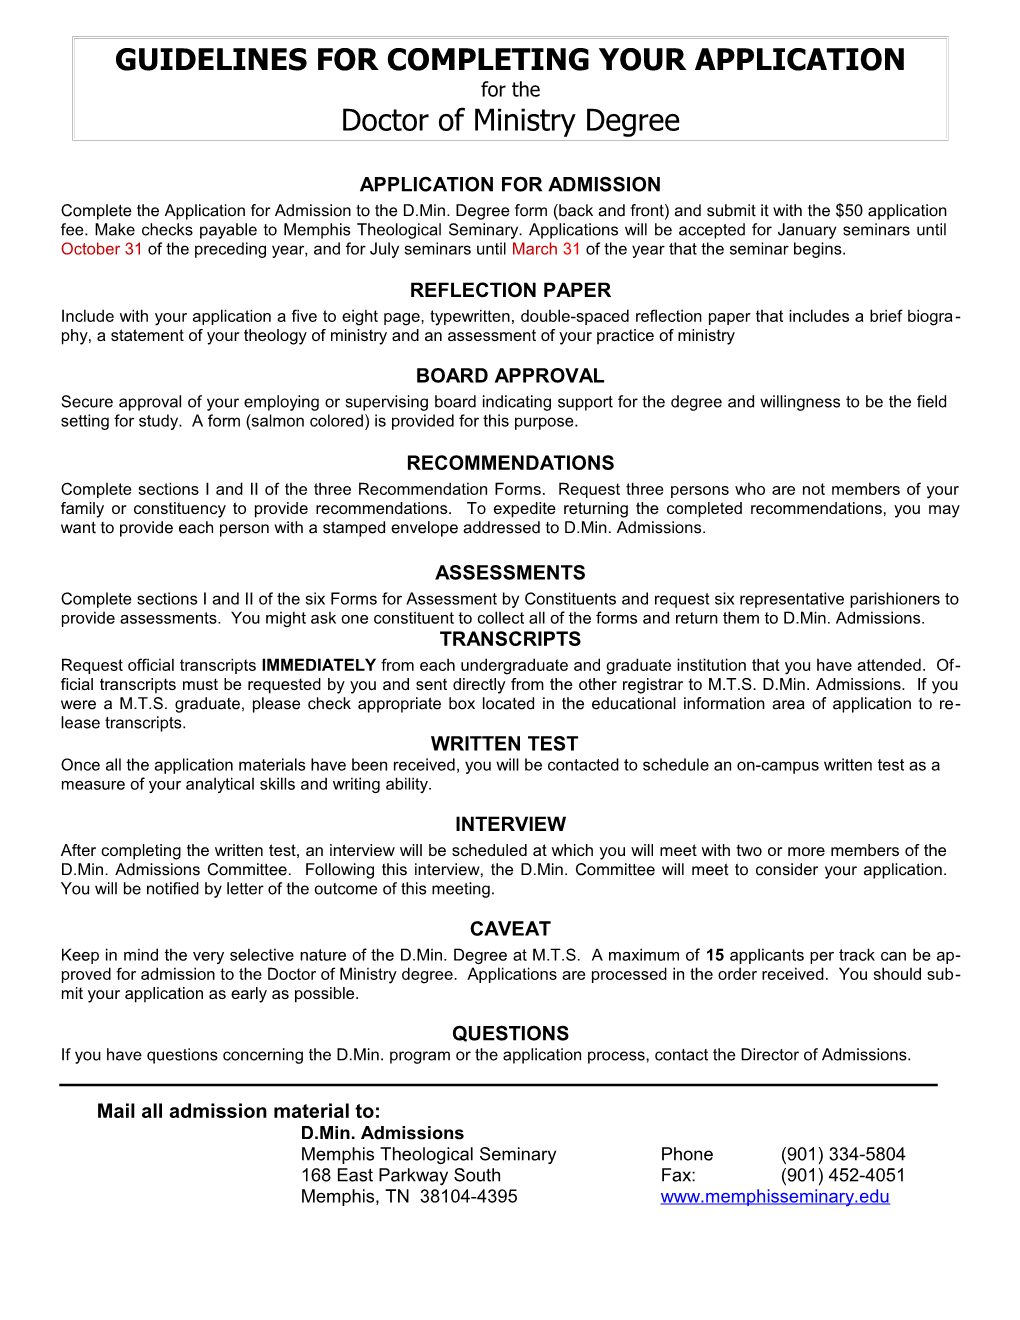 Guidelines for Completing Application Forms